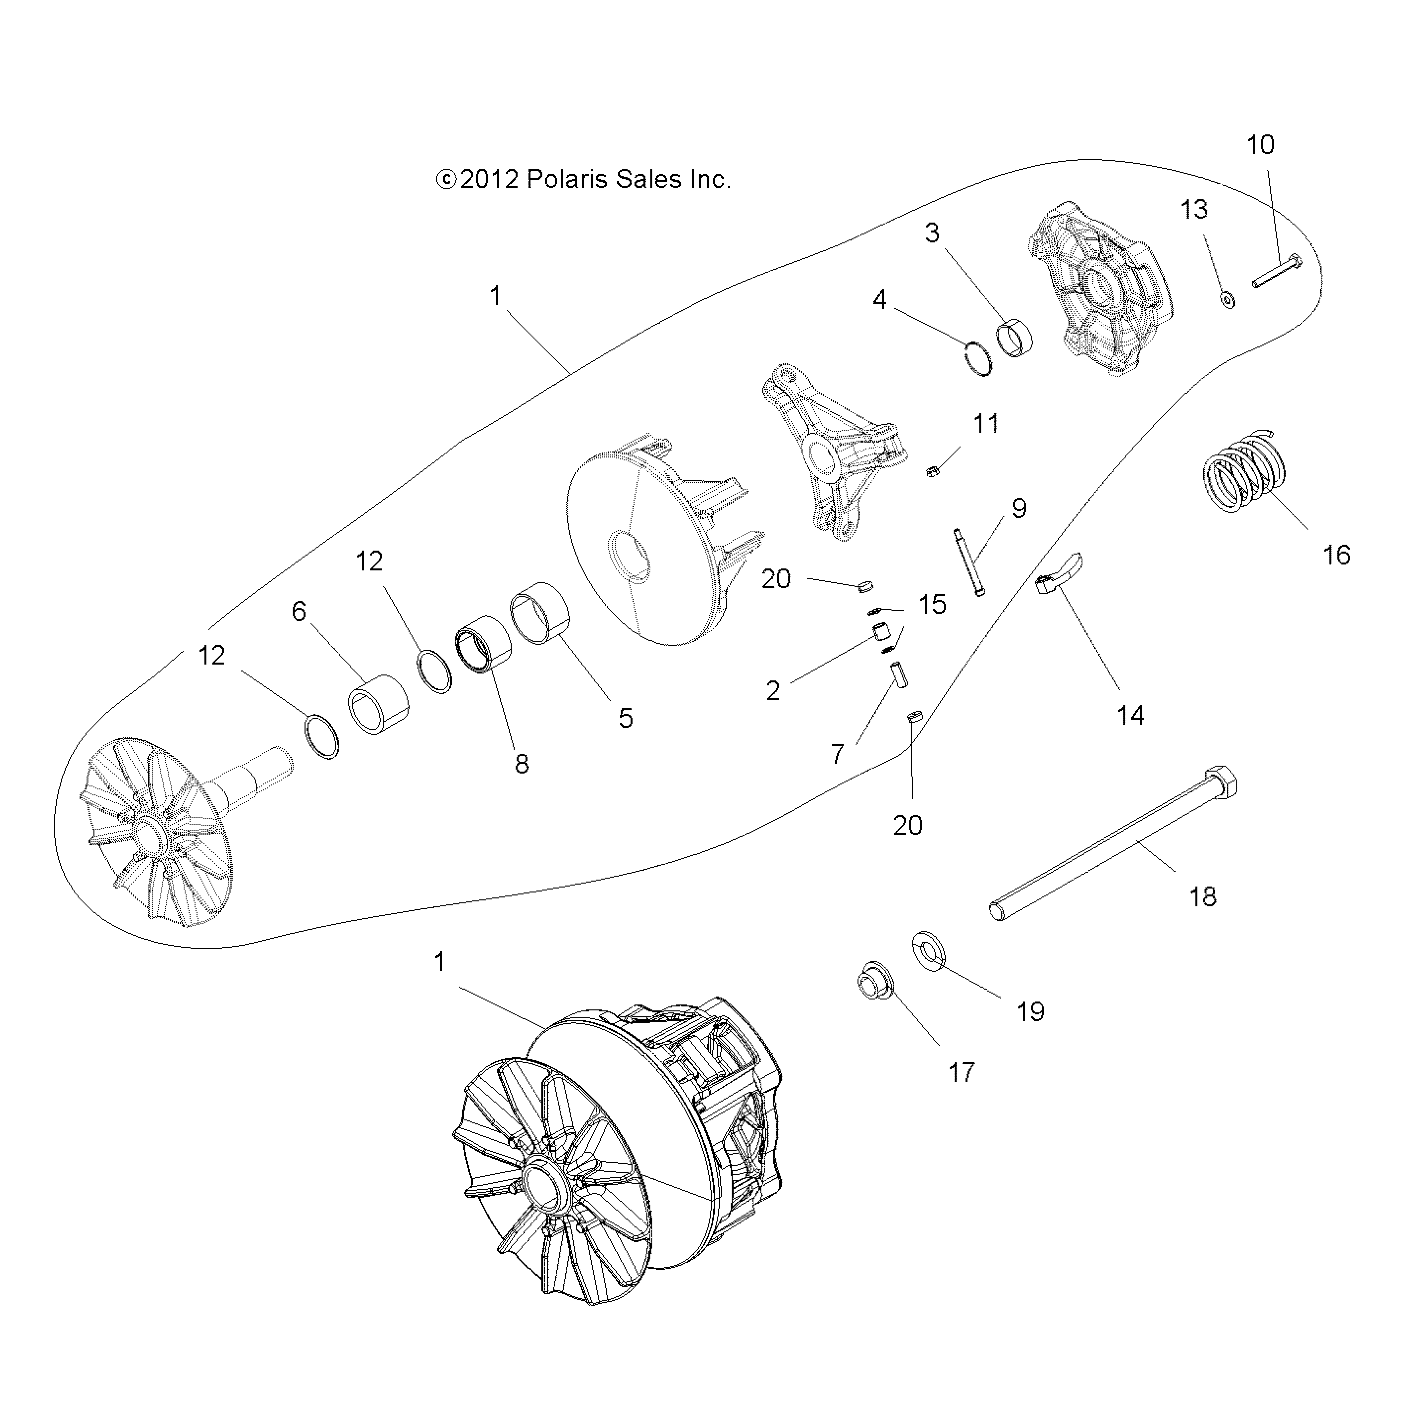 Part Number : 5138015 SHIFT WEIGHT